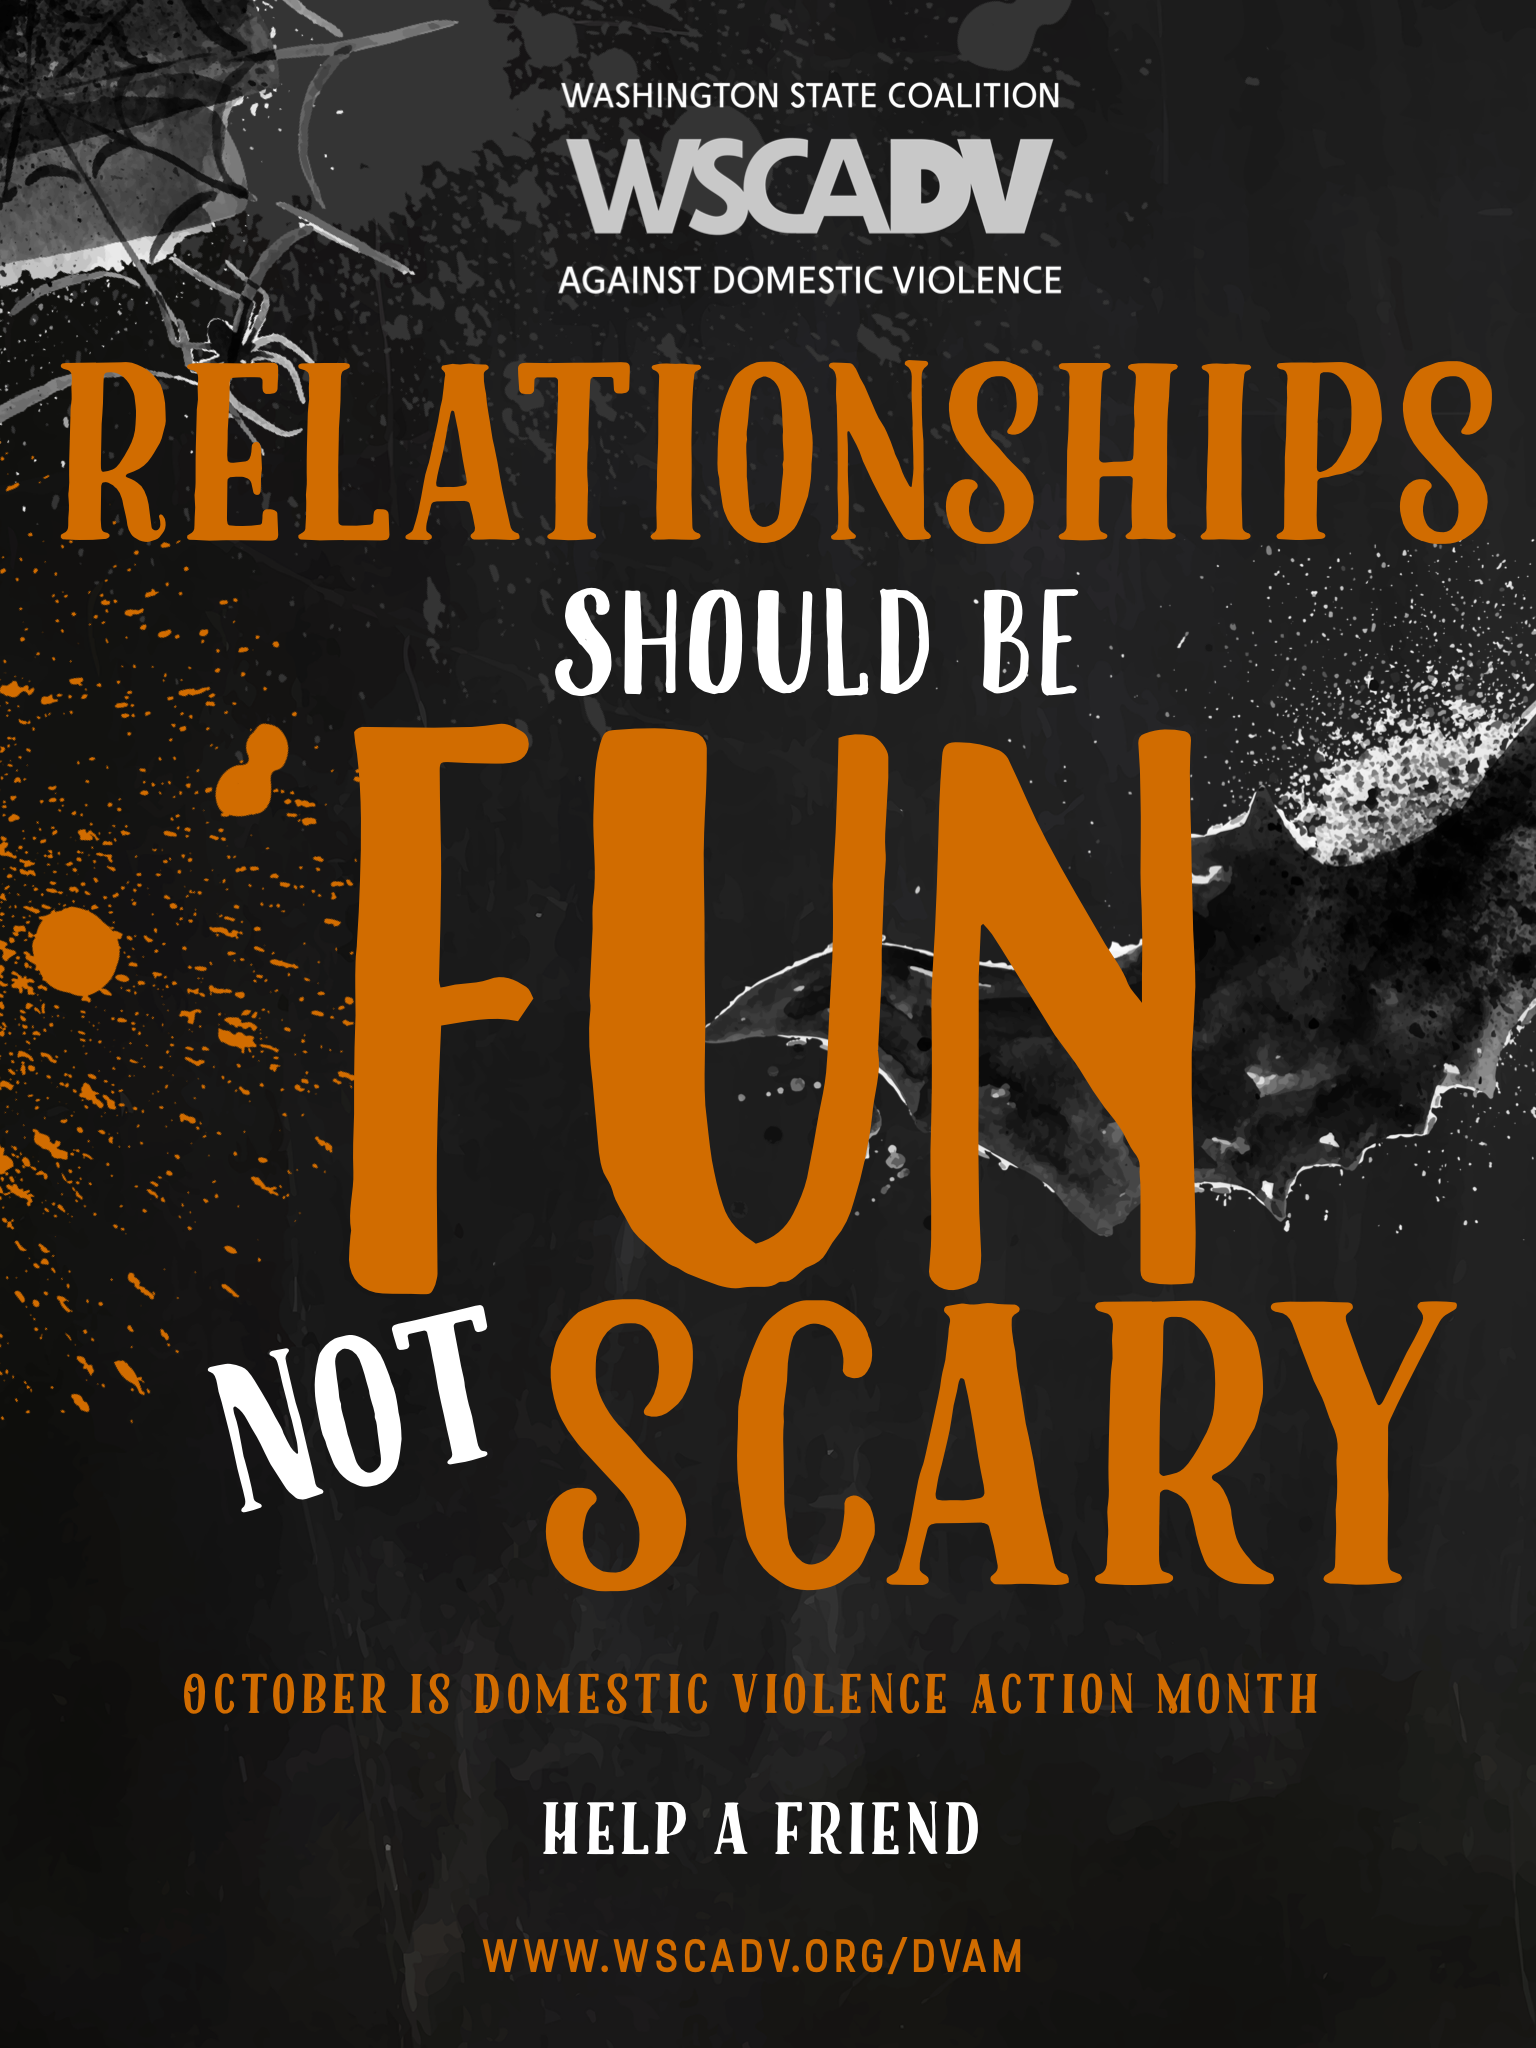 Halloween themed image for Domestic Violence Action Month of a black background with spider webs and bats. Over the images, in white and orange text, the message reads: Relationships should be fun, not scary. October is Domestic Violence Action Month. Help a friend. www.wscadv.org/dvam